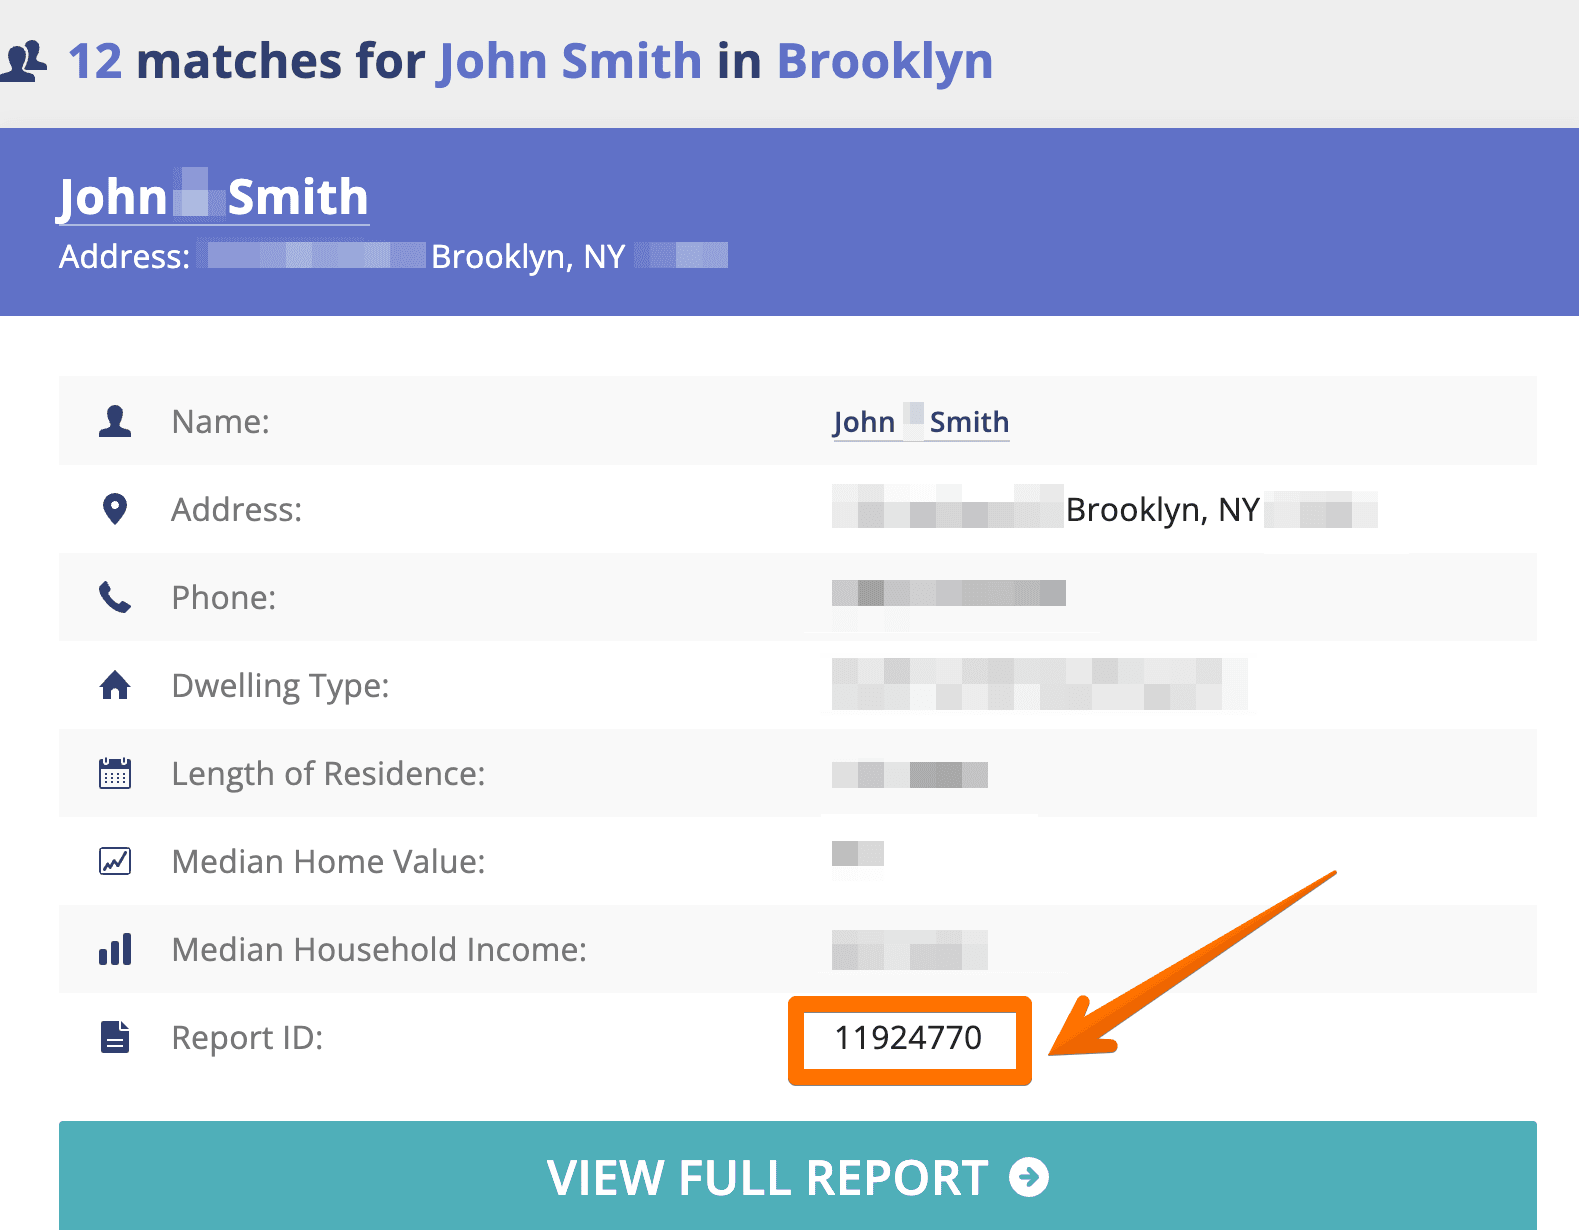 Once you’ve found the matching profile in the search results, copy the “Report ID” number